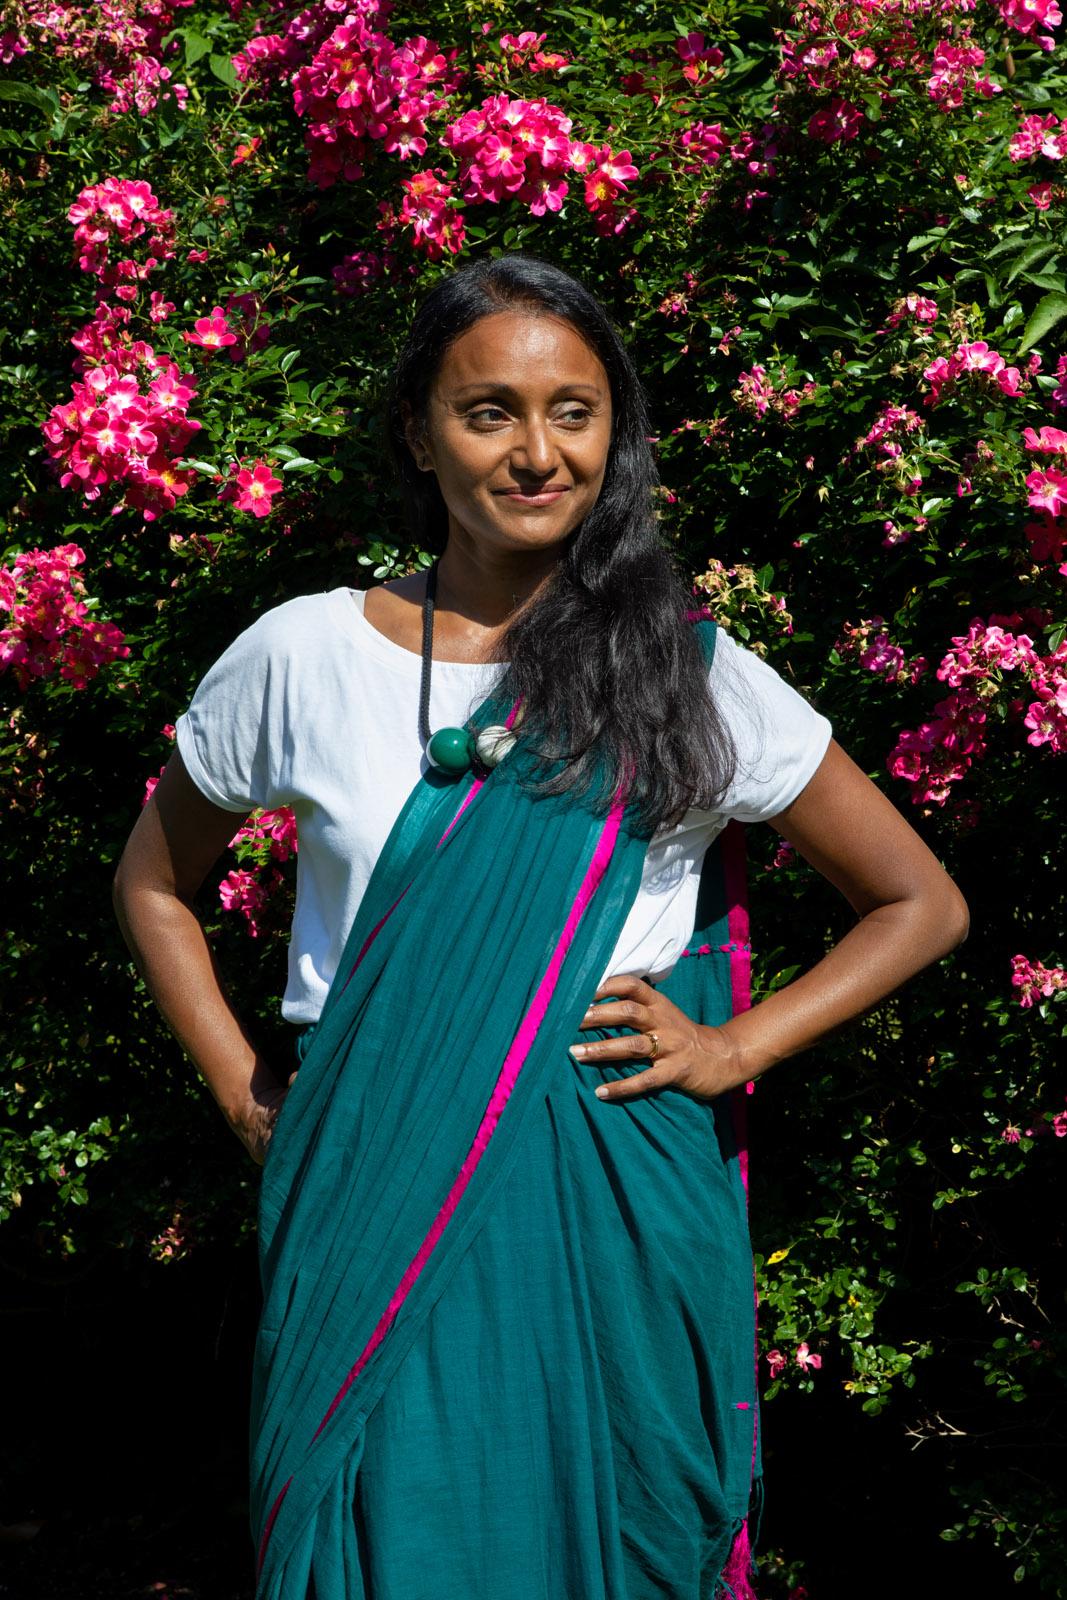 Photograph of a woman standing in front of a pink rose bush. She is wearing a blue sari draped across her left shoulder, and is standing with her hands on her hips, smiling and looking off to the left.